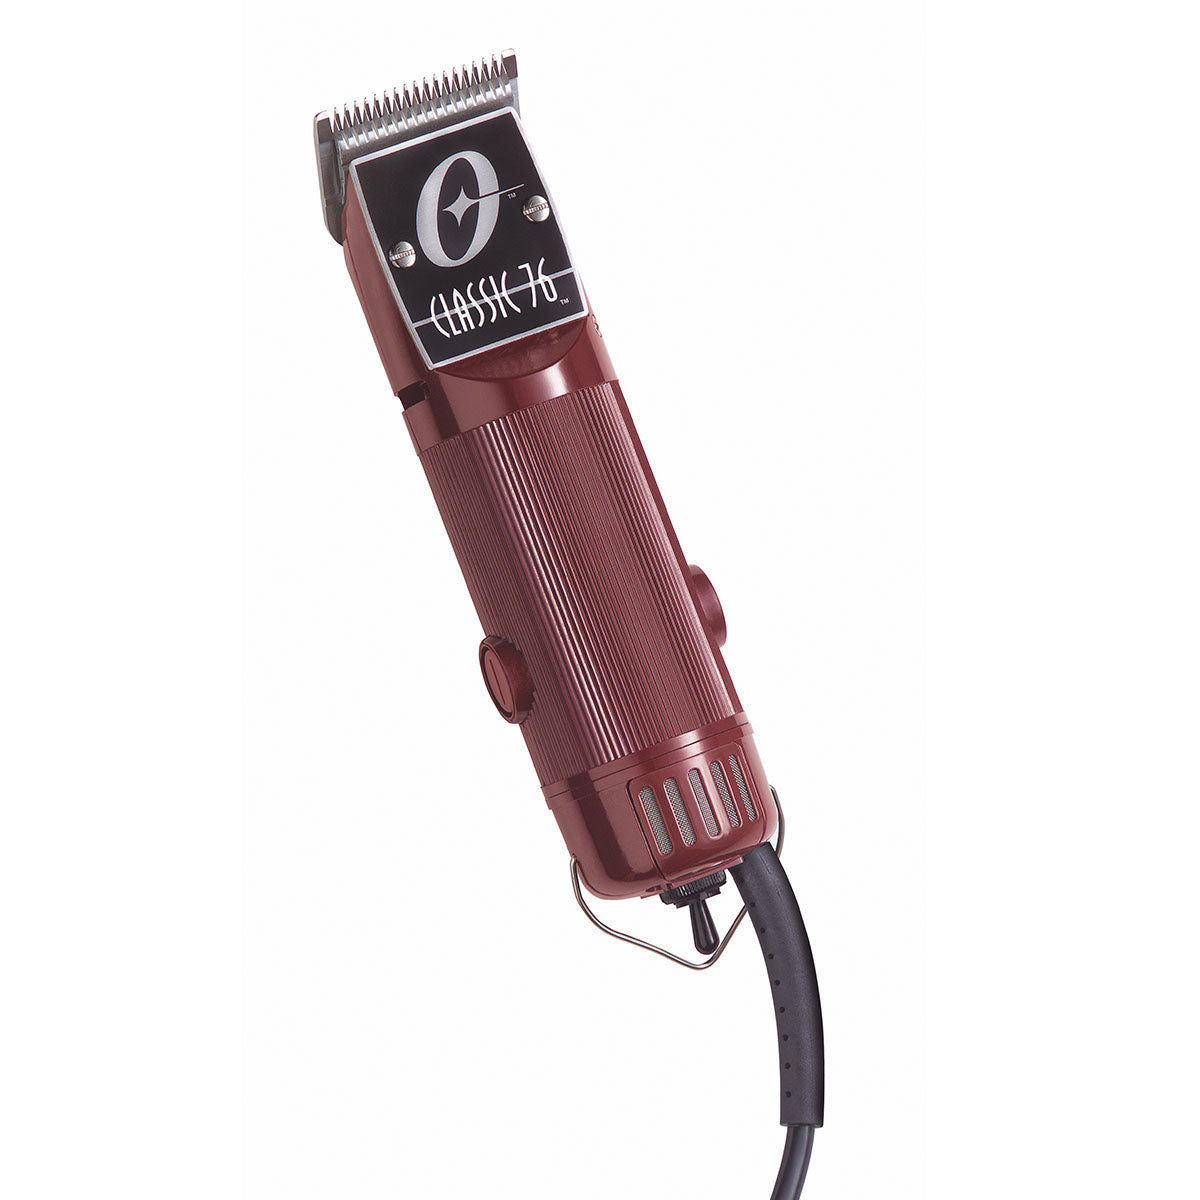 SHARE Oster Classic 76 Universal Motor Professional Hair Clipper